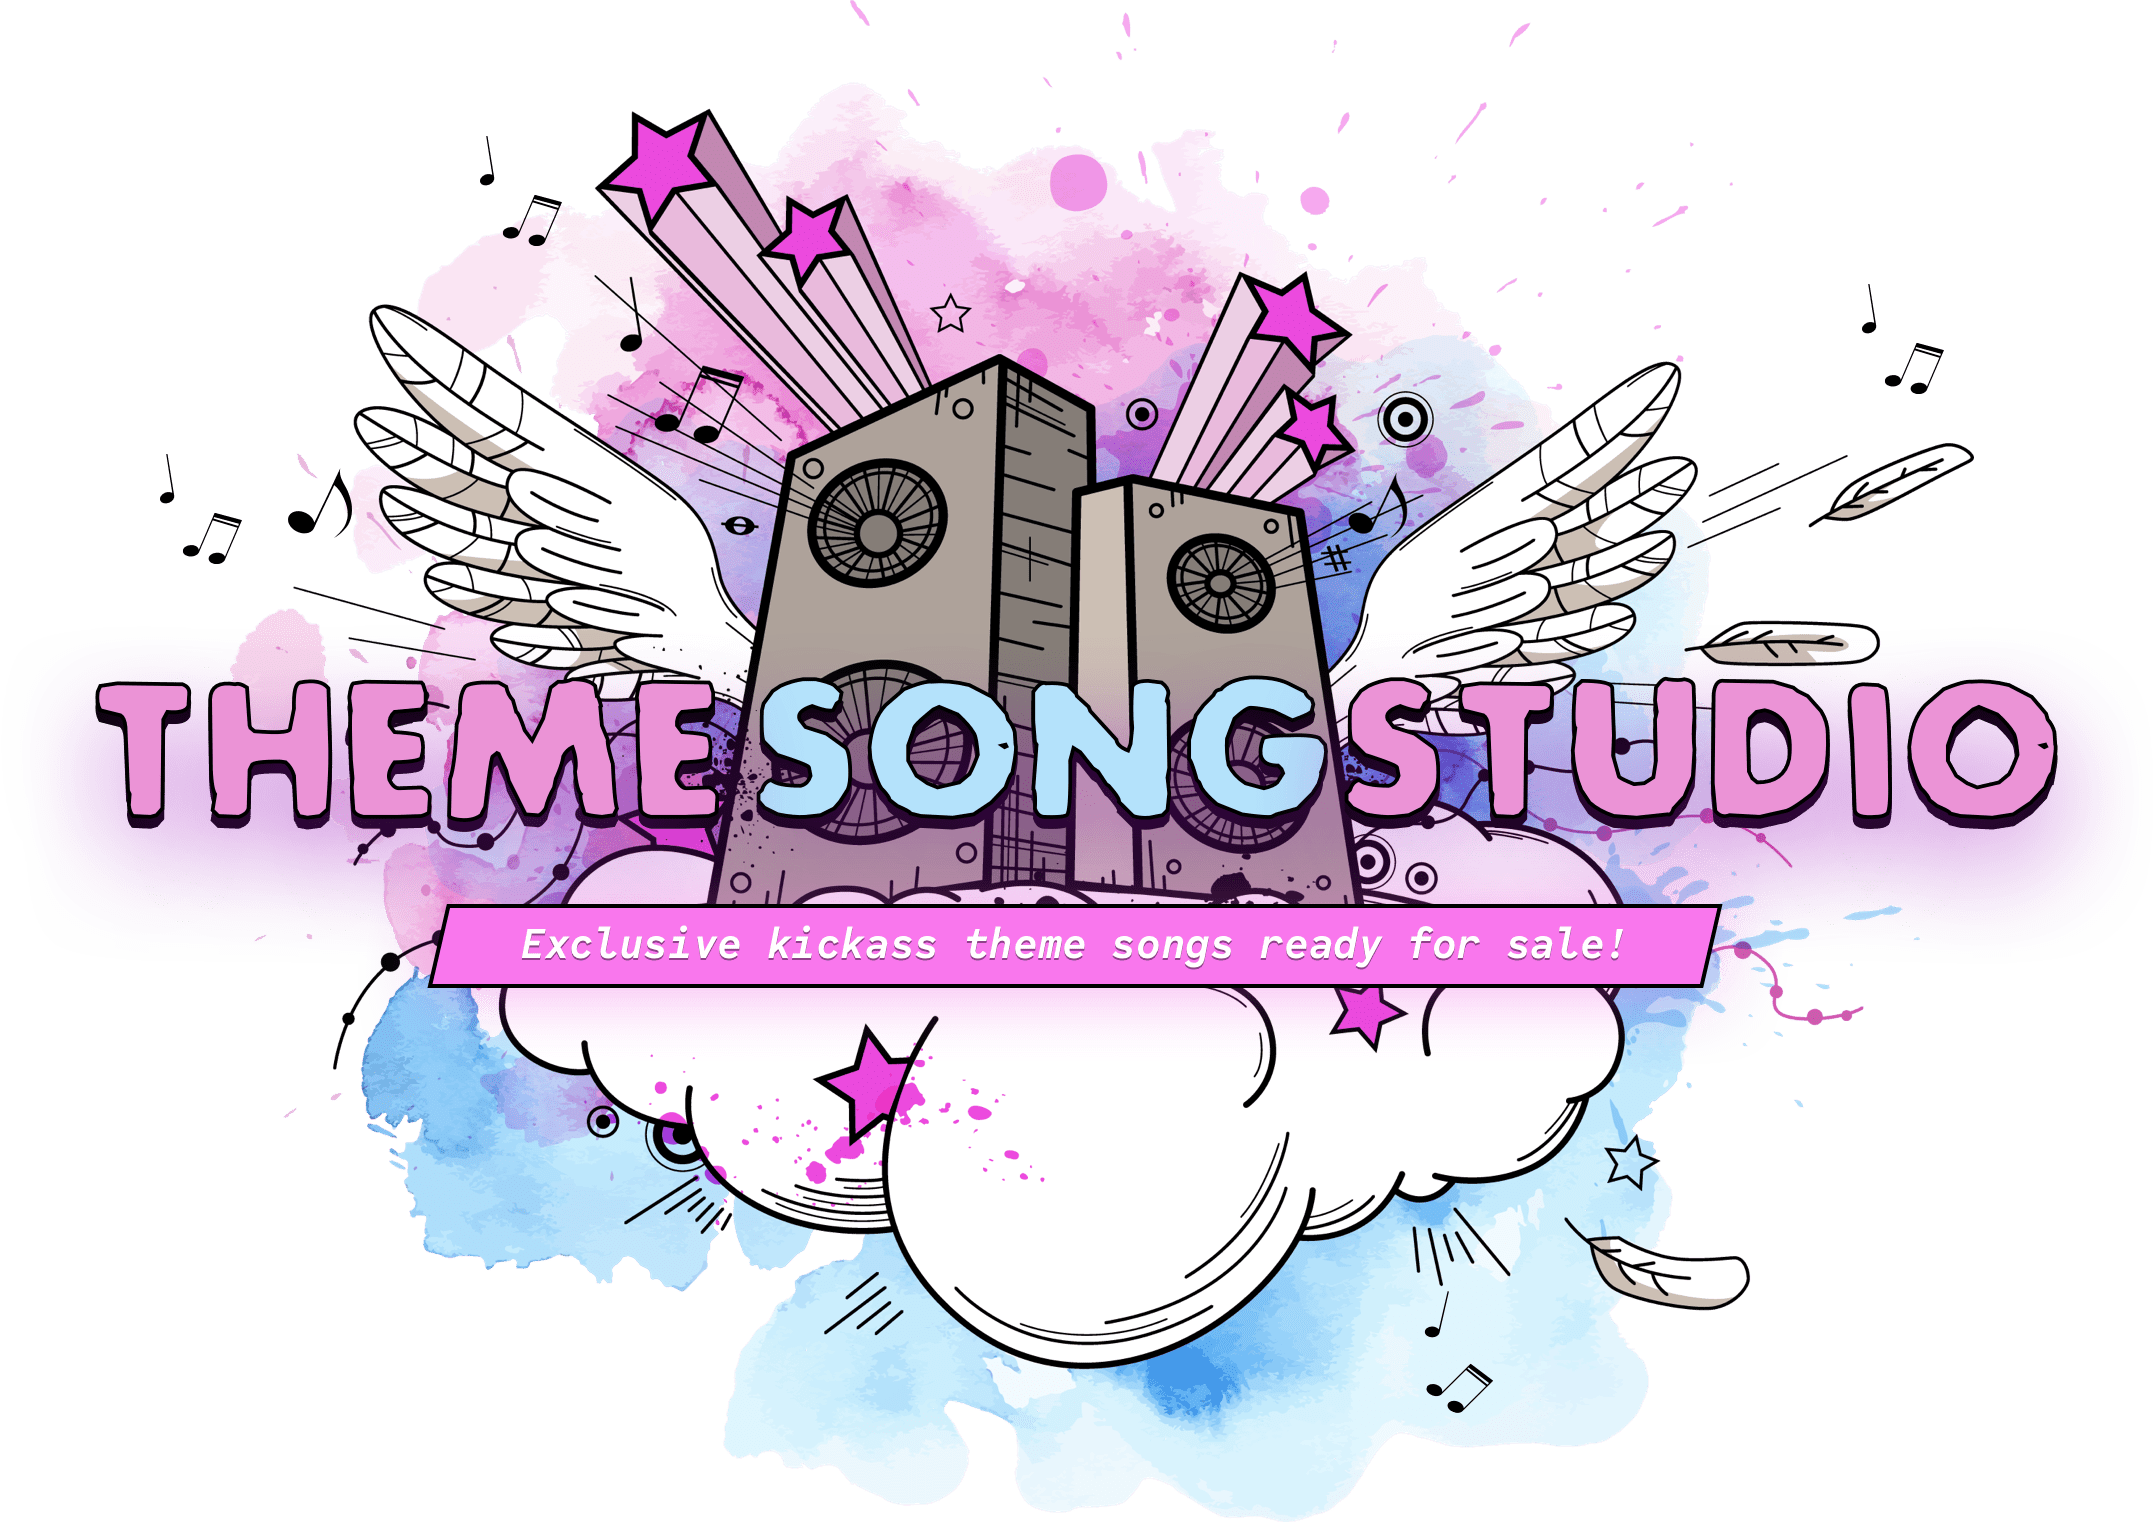 ThemeSongStudio - Kickass exclusive theme songs ready for sale